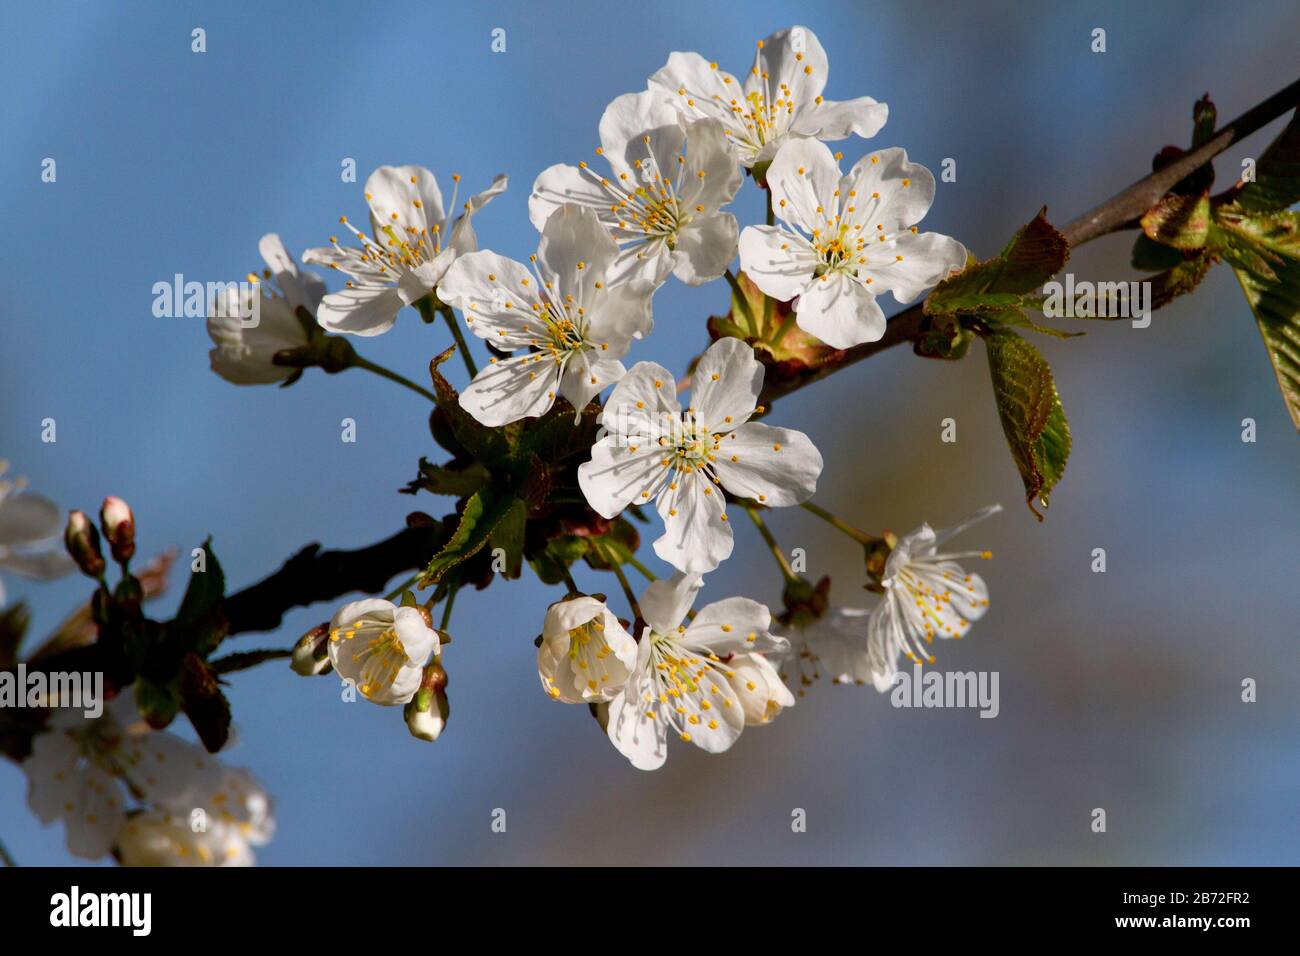 A sprig of white cherry blossom on a tree in Nanaimo, Vancouver Island, BC, Canada in springtime Stock Photo